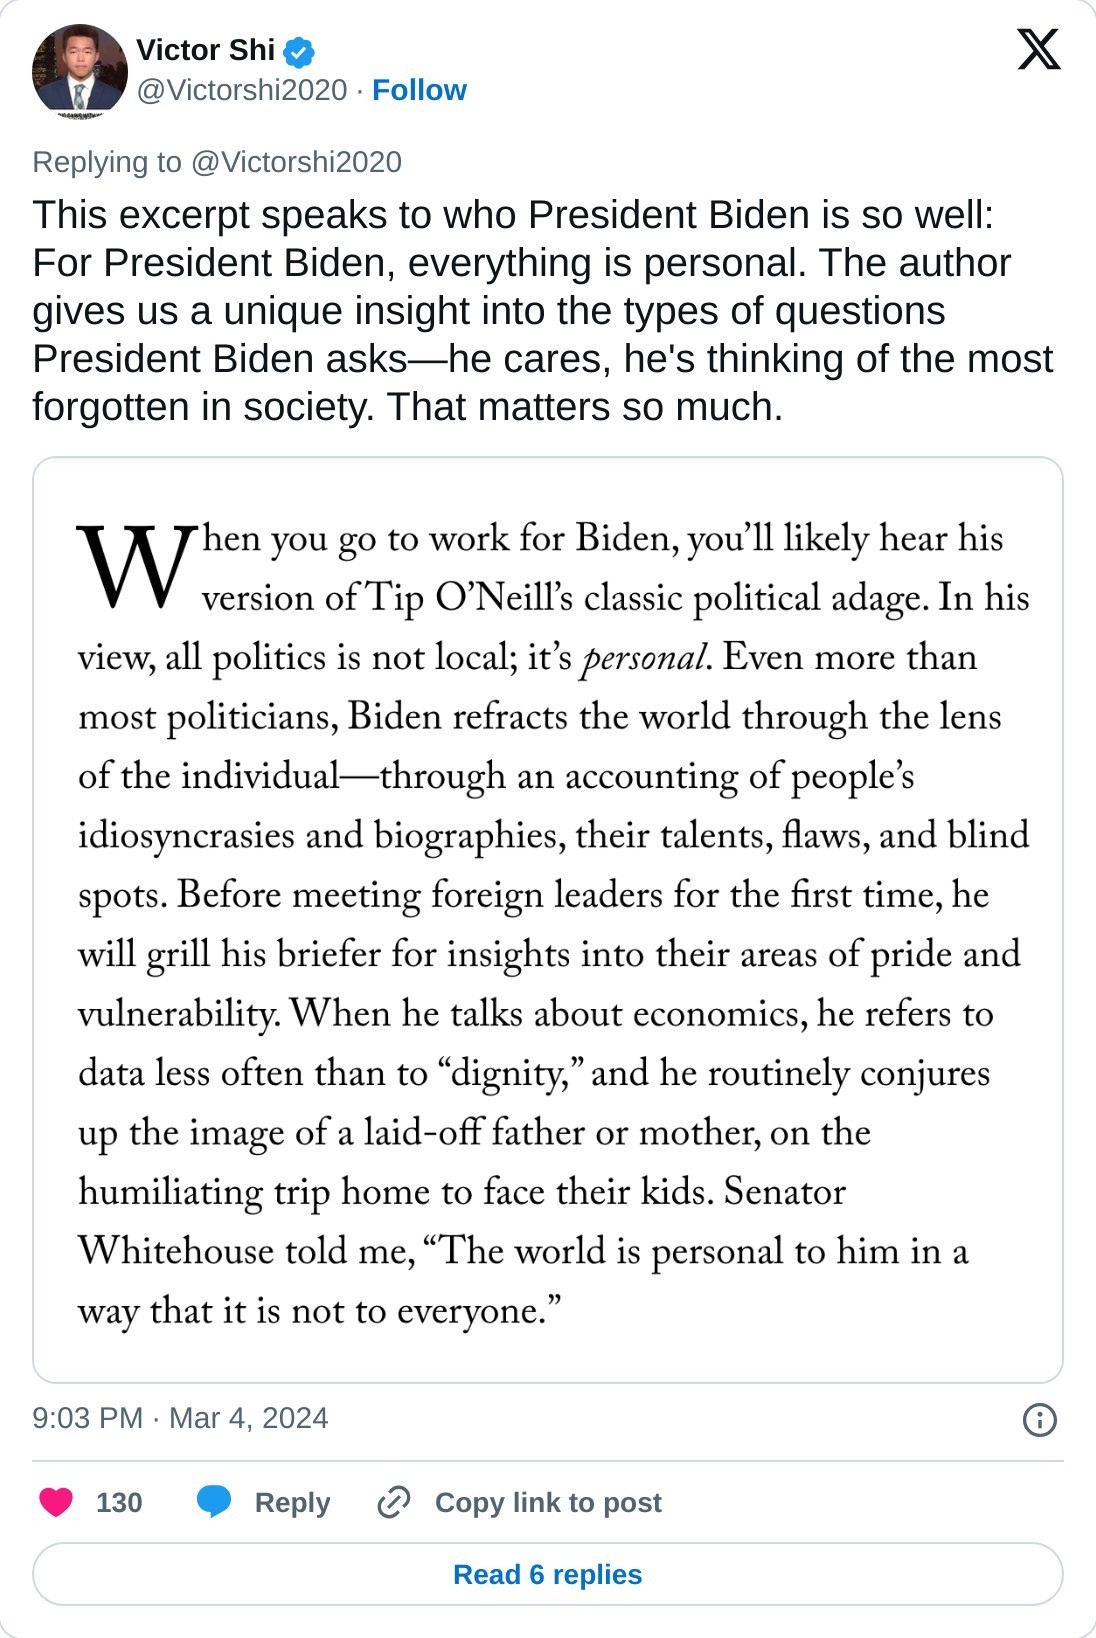 This excerpt speaks to who President Biden is so well: For President Biden, everything is personal. The author gives us a unique insight into the types of questions President Biden asks—he cares, he's thinking of the most forgotten in society. That matters so much. pic.twitter.com/7ALsZv6HrL  — Victor Shi (@Victorshi2020) March 4, 2024